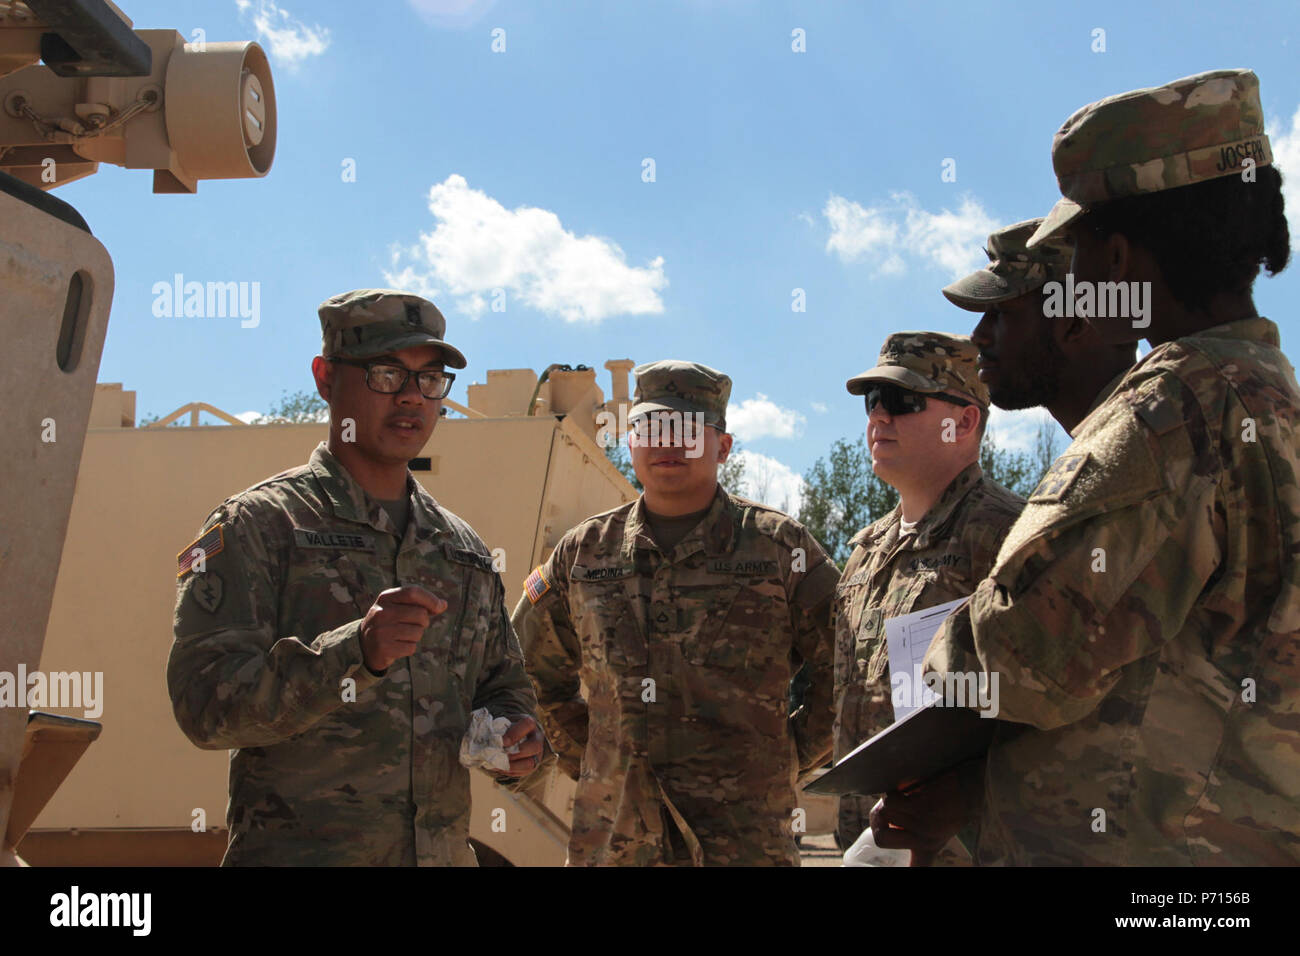 Sgt. 1st Class Joel Vallete, signal section chief of Headquarters Company, 1st Battalion, 8th Infantry Regiment, 3rd Armored Brigade Combat Team, 4th Infantry Division, goes over the safety features on a M113 Command Post Vehicle with a few of his soldiers on May 11, 2017 at Mihail Koglanicenau Air Base, Romania. Vallete spends a lot of his time in and out of the field with his Soldiers training them in their on the job skills, as well as the art of boxing. Stock Photo